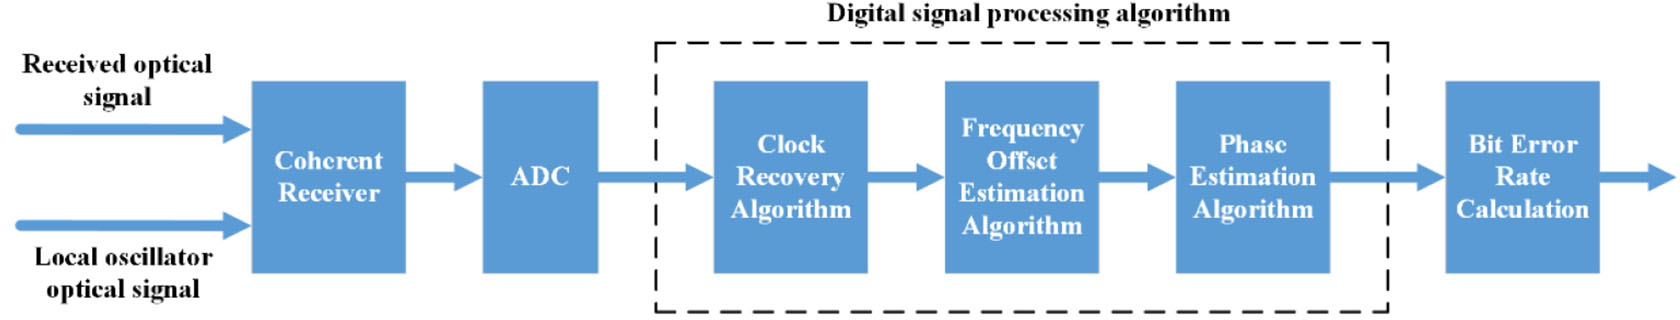 Coherent receiving system based on digital signal processing